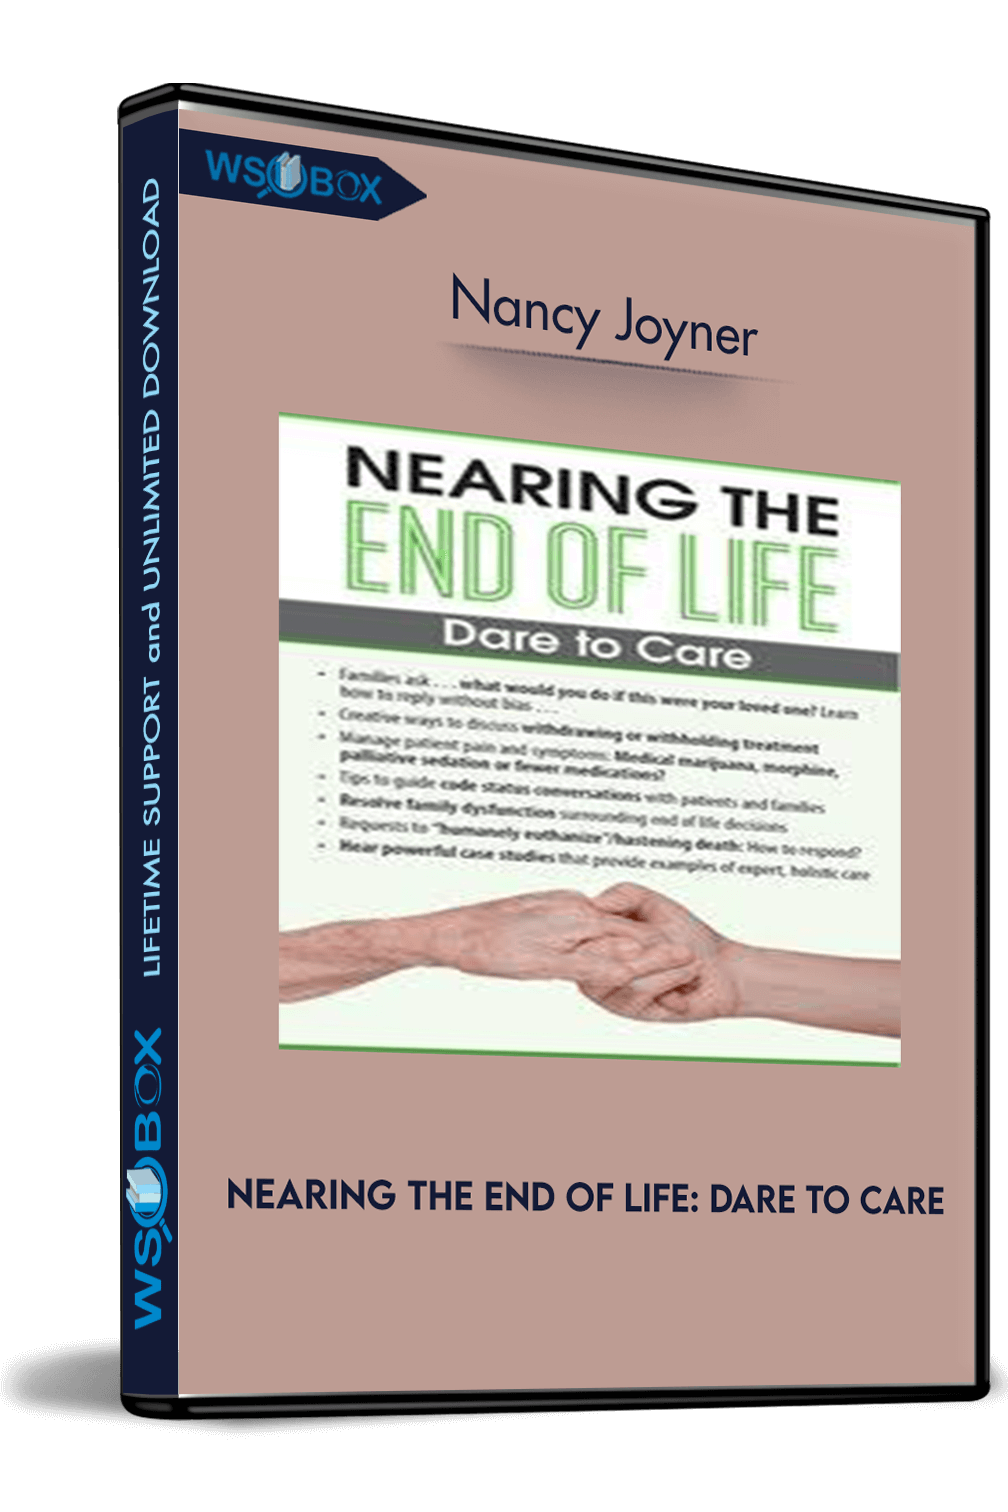 Nearing the End of Life: Dare to Care – Nancy Joyner